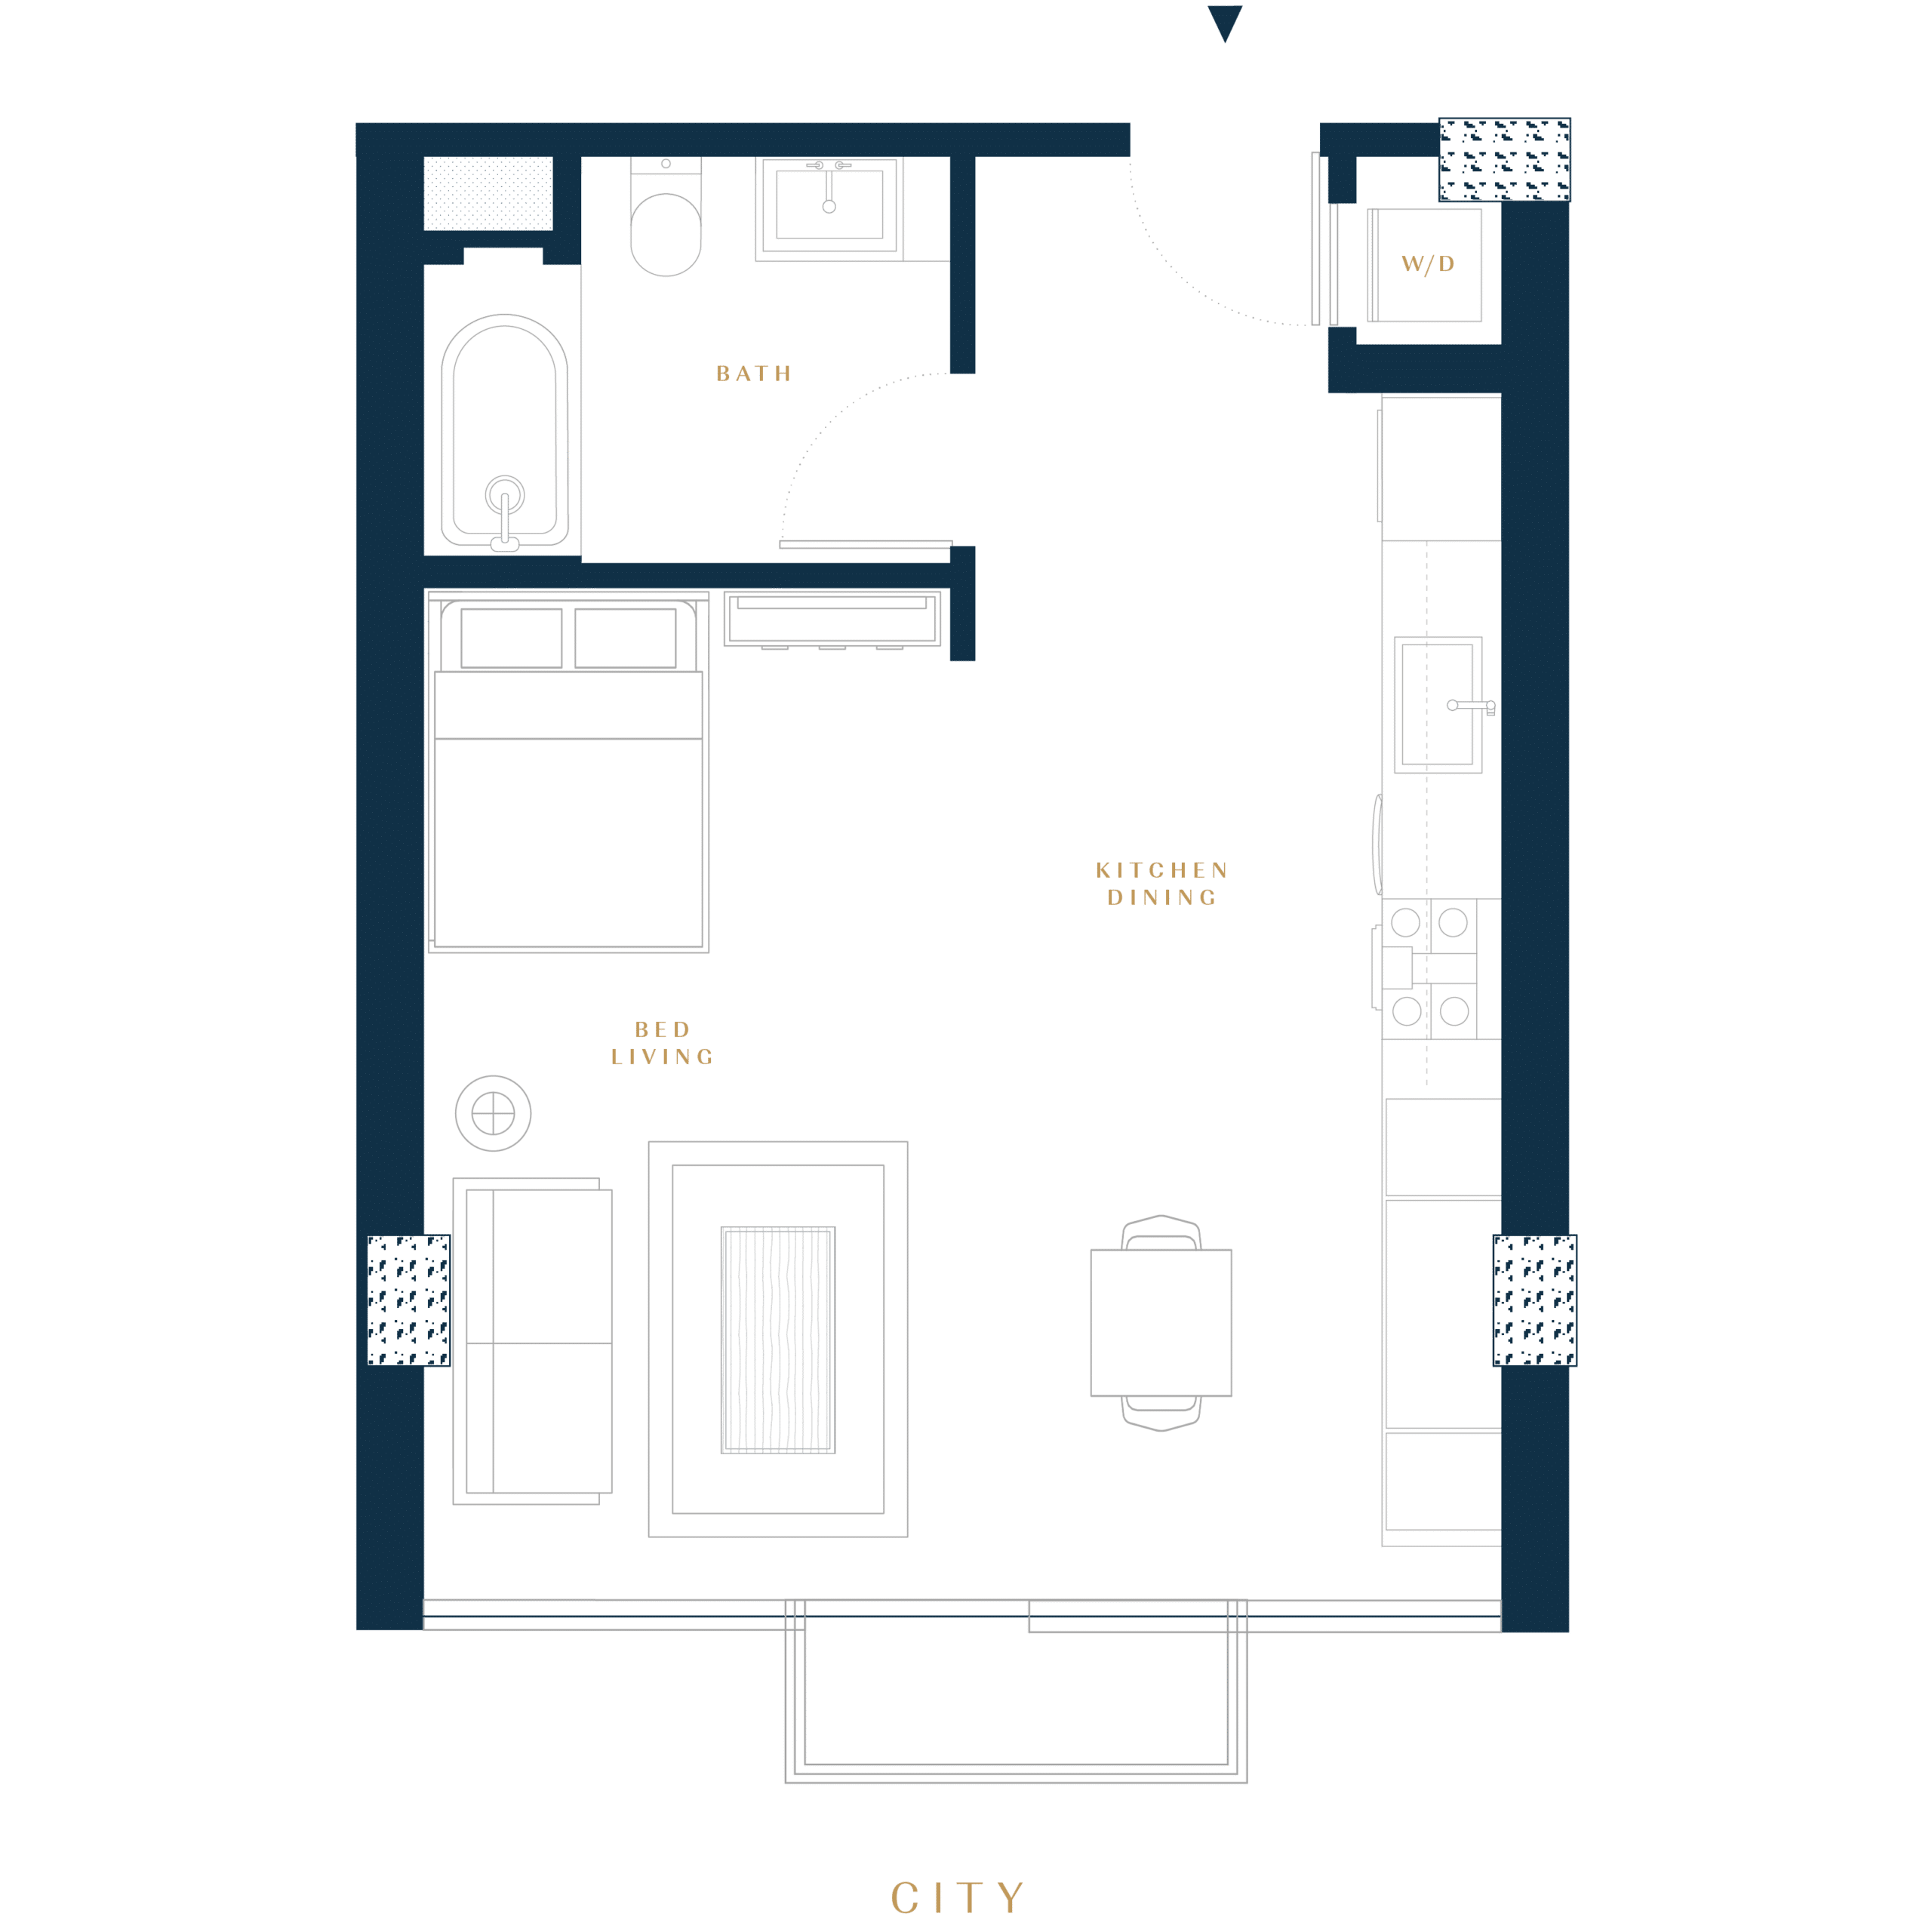 Residence S1luxury condo floor plan in San Francisco Dogpatch